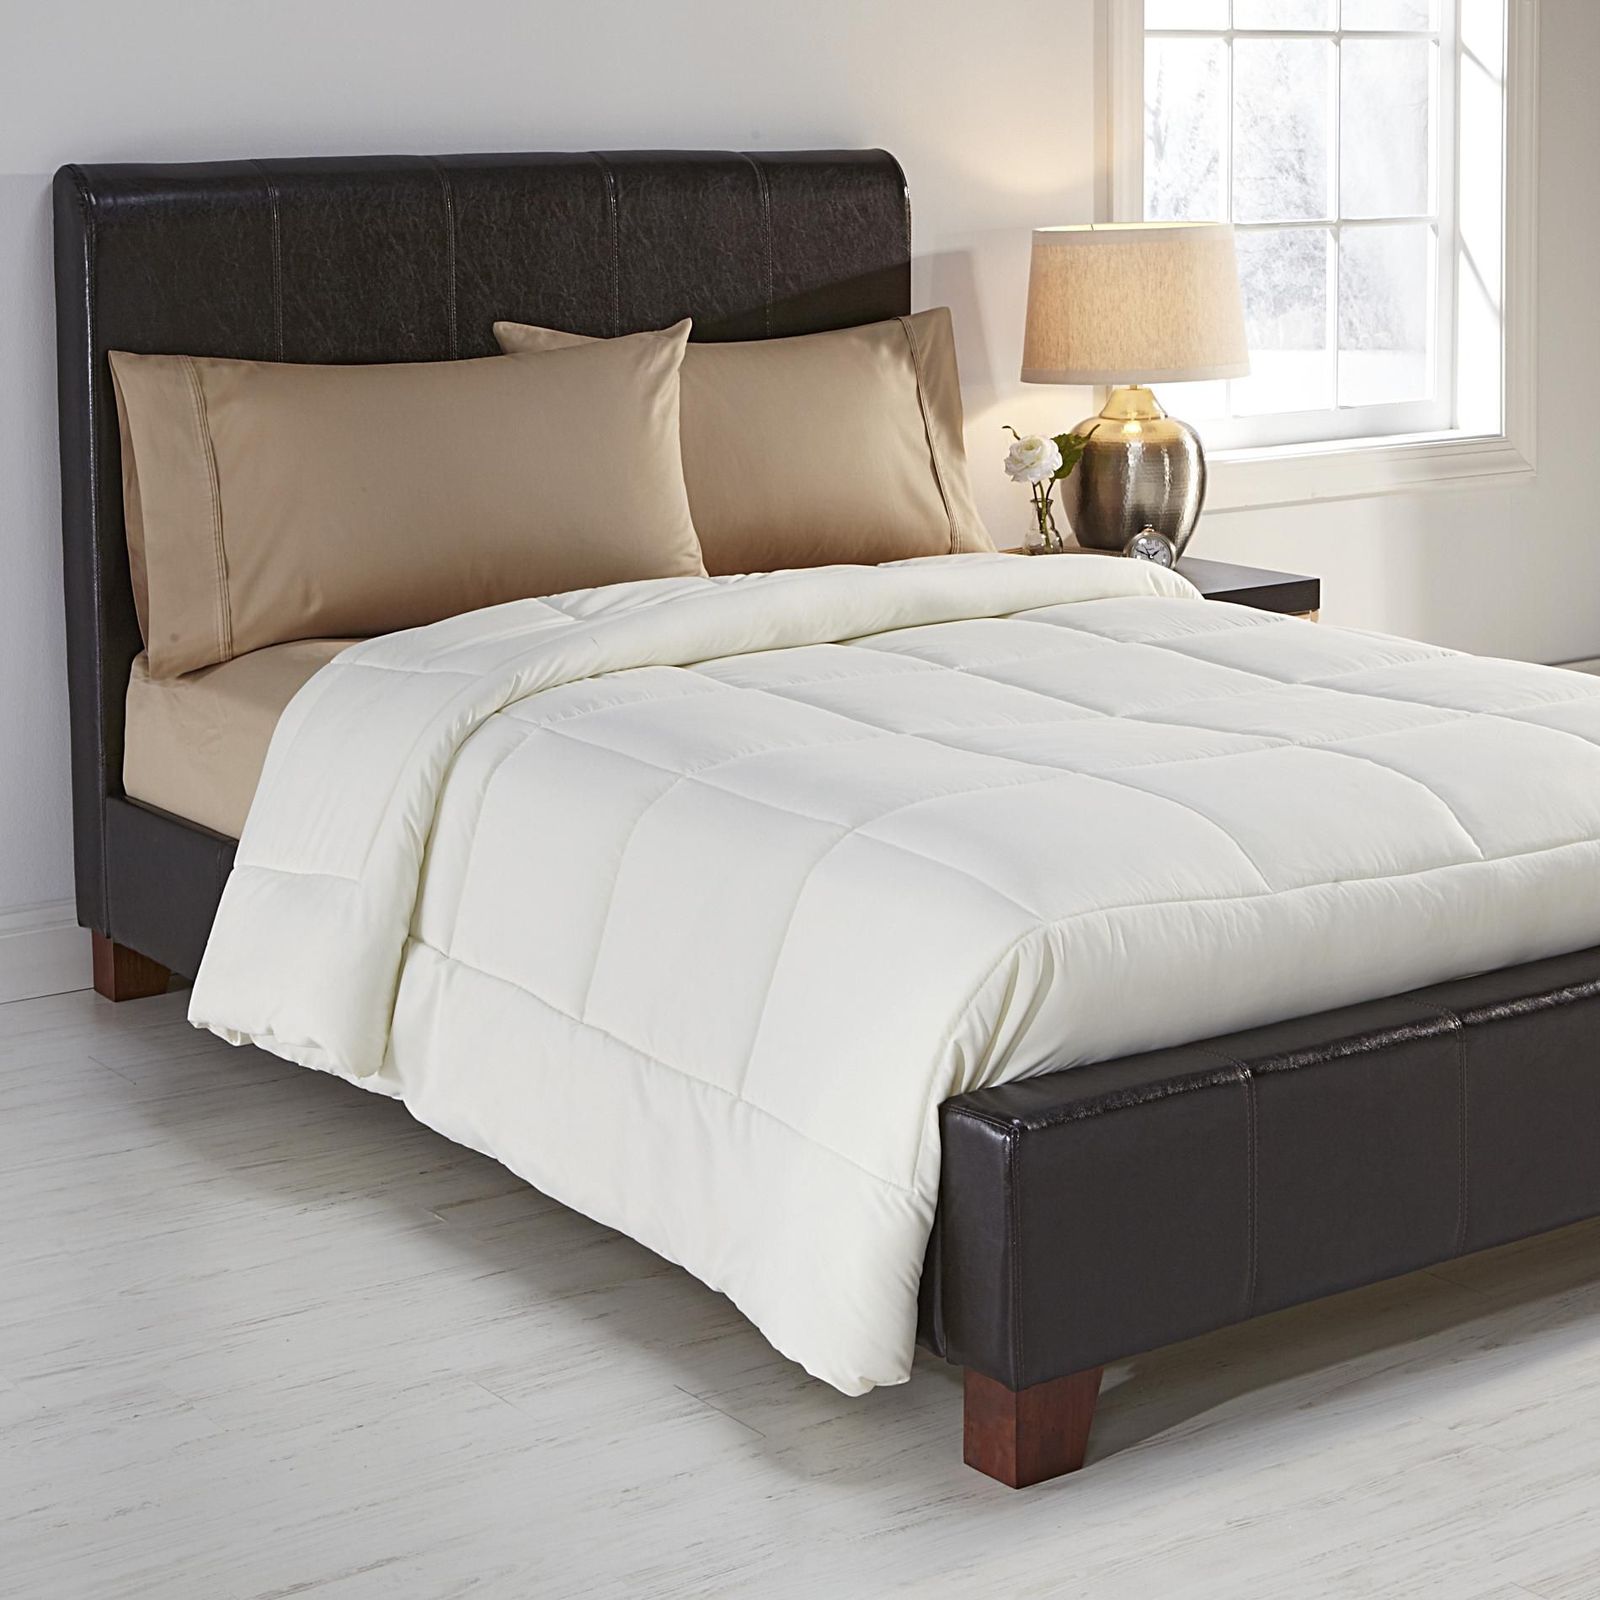 Colormate Ivory Ultra Plush Comforter